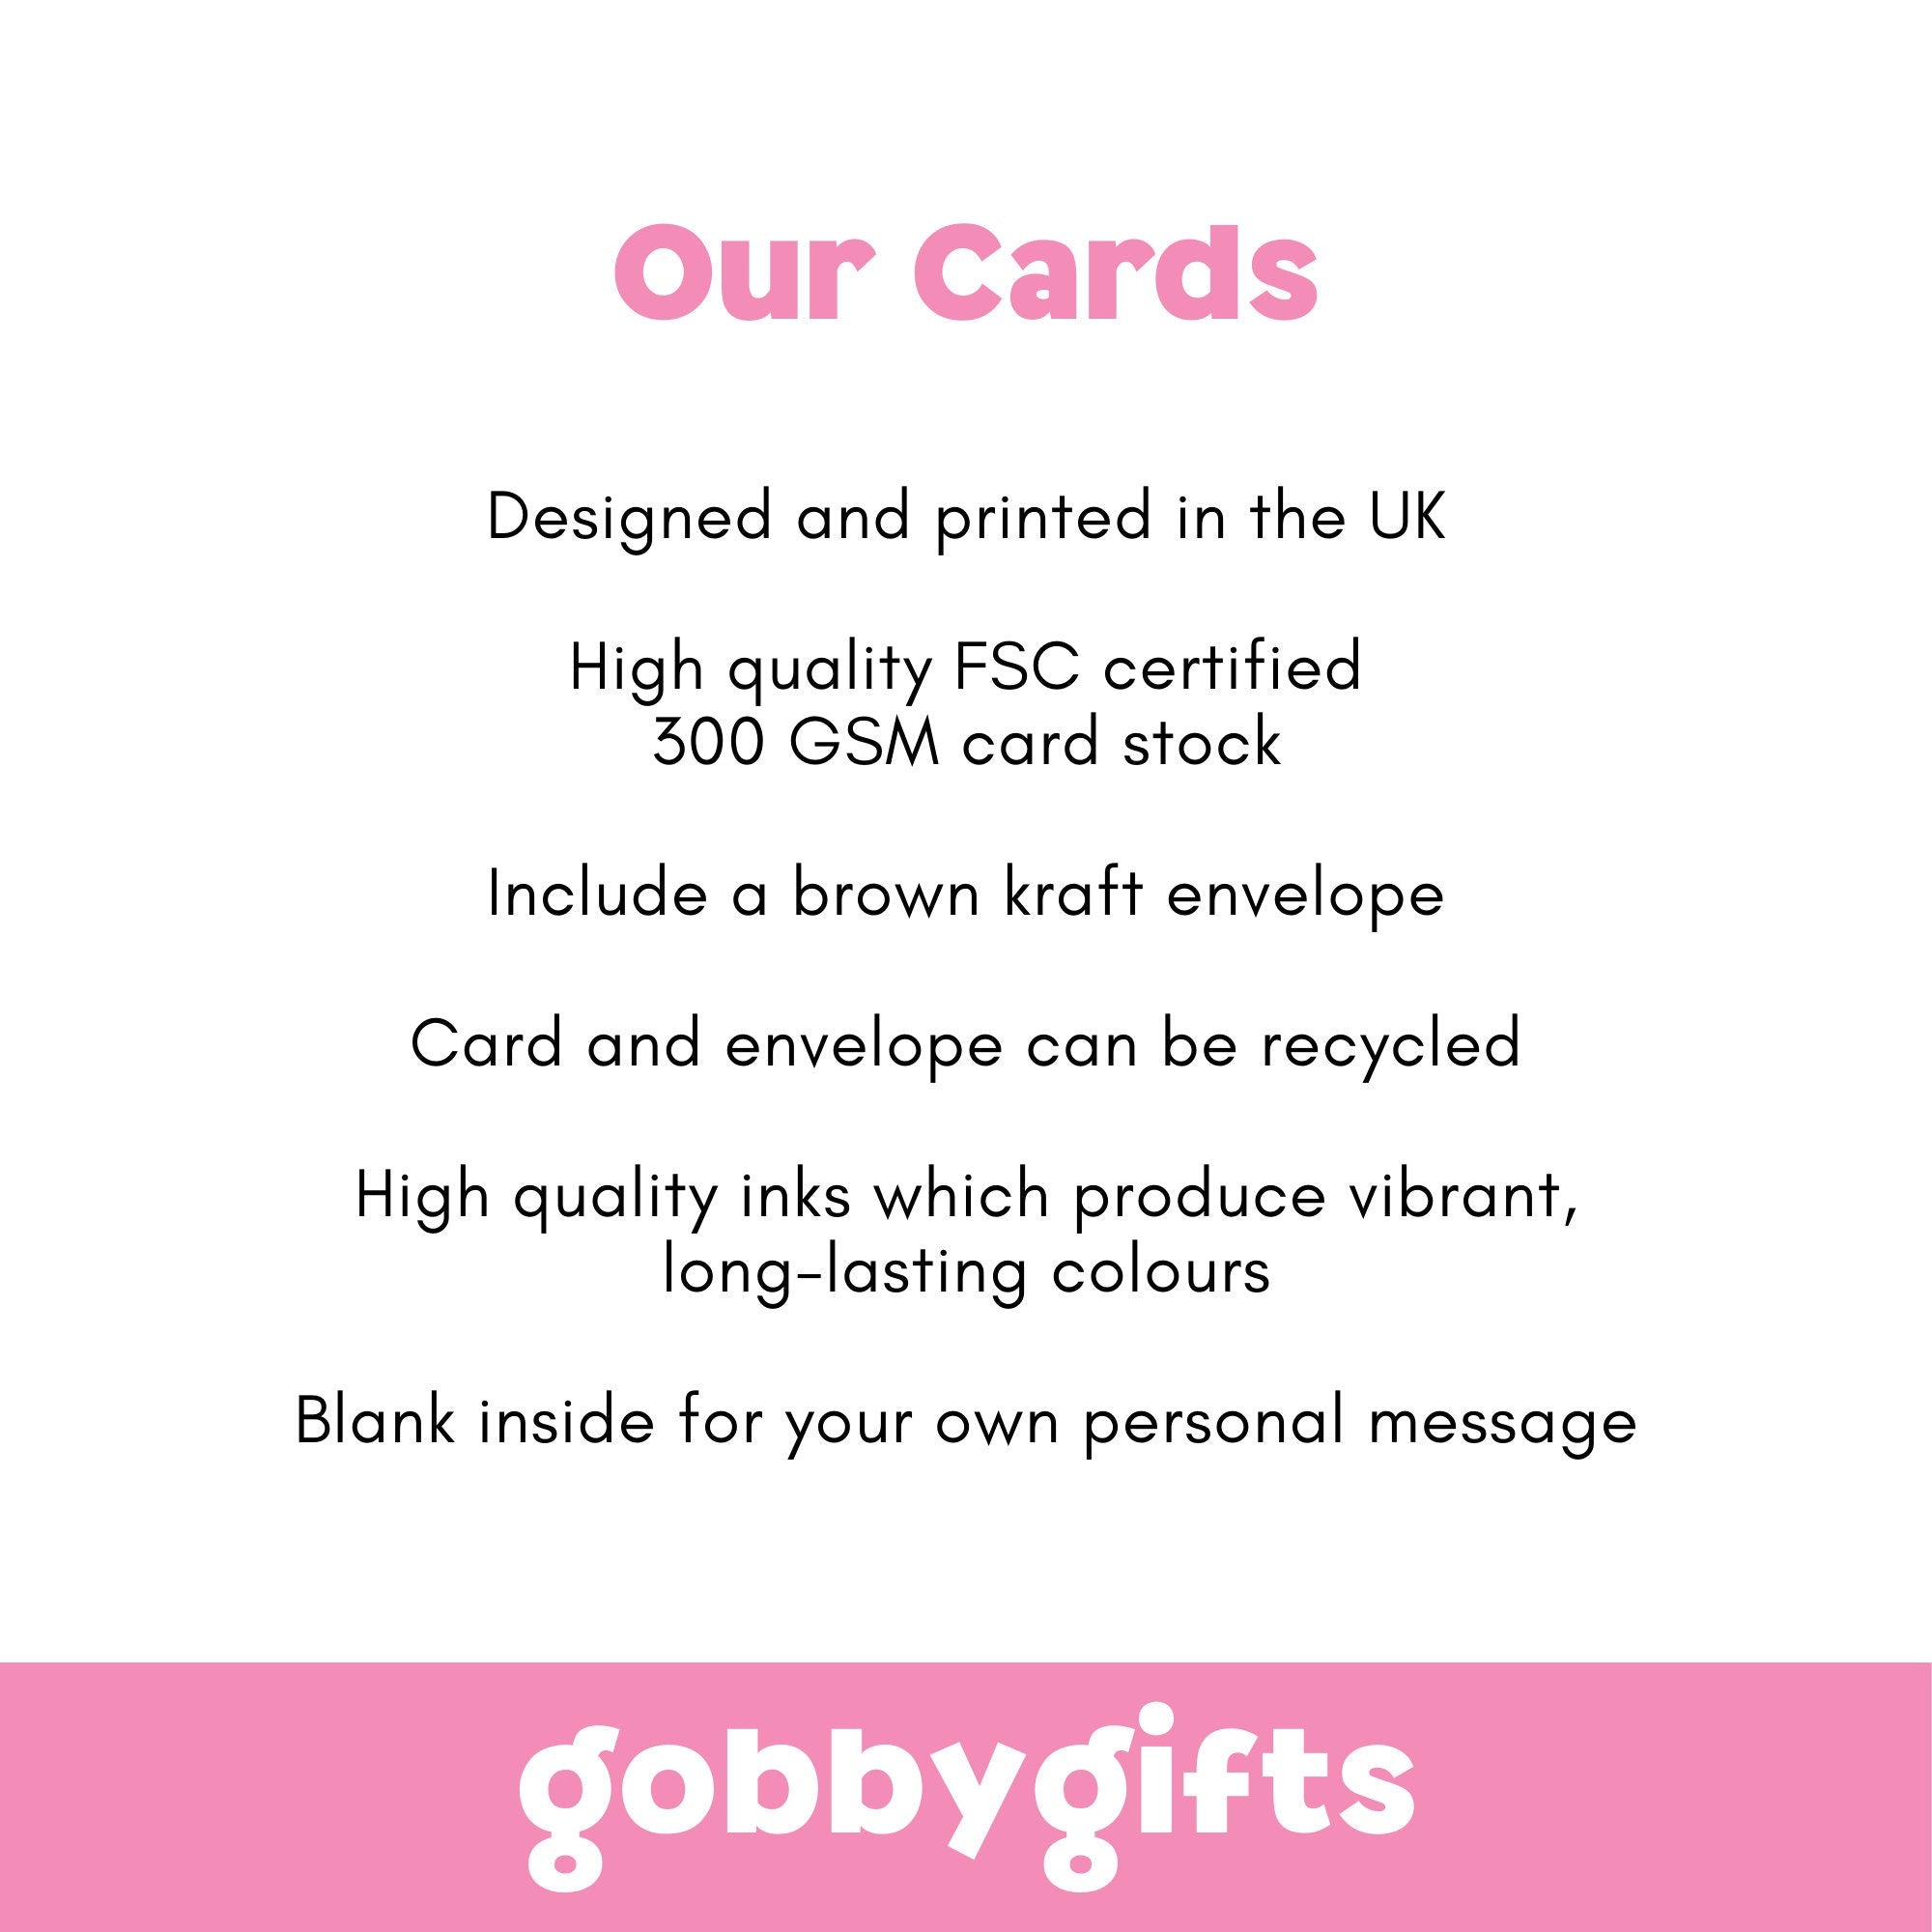 Proud Of You Card, New Job Card, Congratulations Card, Well Done Card, Passed Exams Card, Graduation, Encouragement, Support Card,